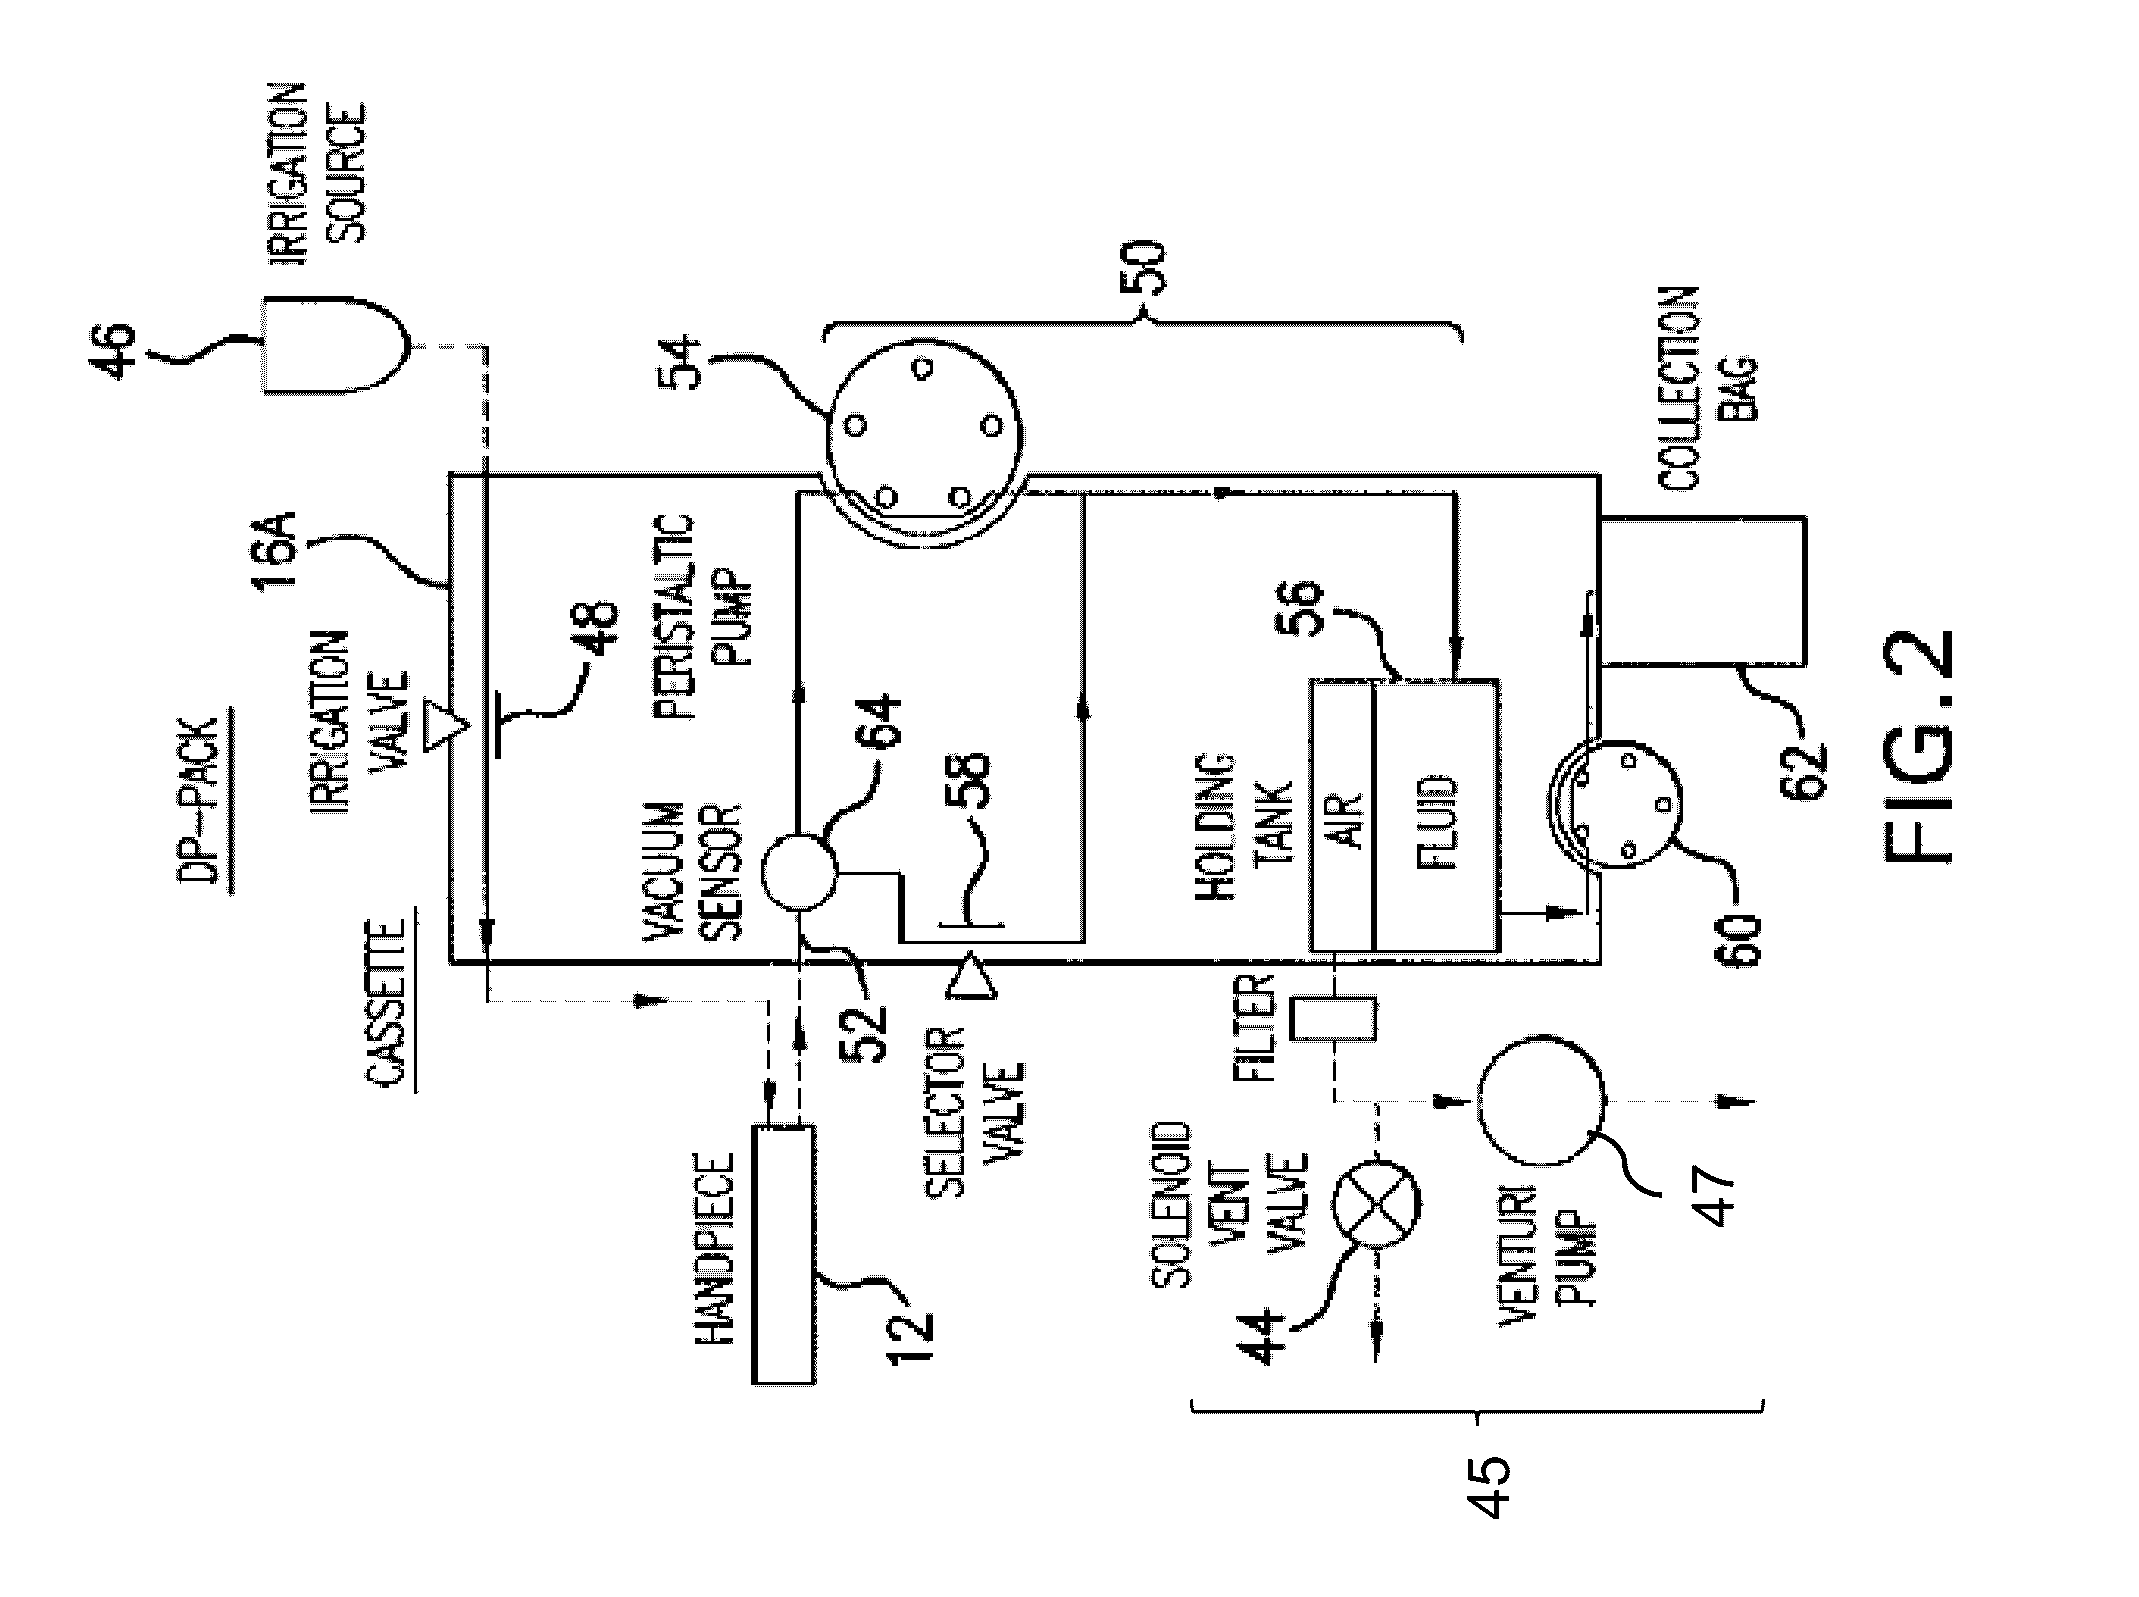 System and method for providing pressurized infusion and increasing operating room efficiency